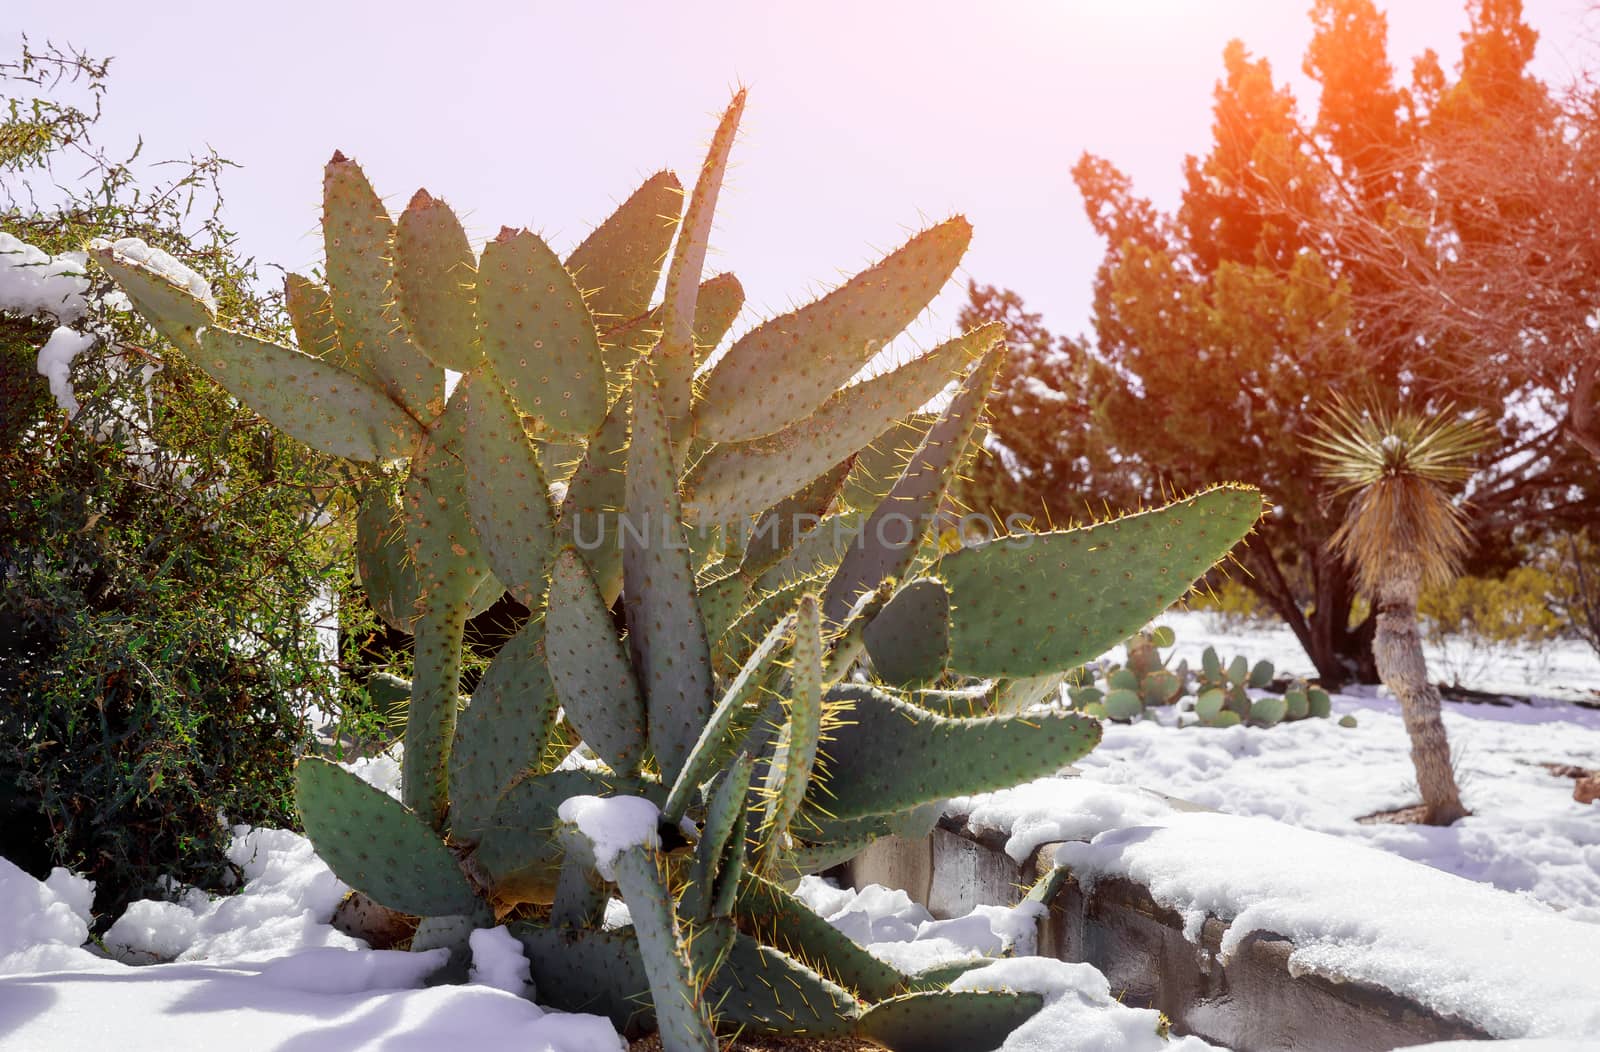 Cactus prickly pear covered in snow after snow storm North Scottsdale Arizona desert